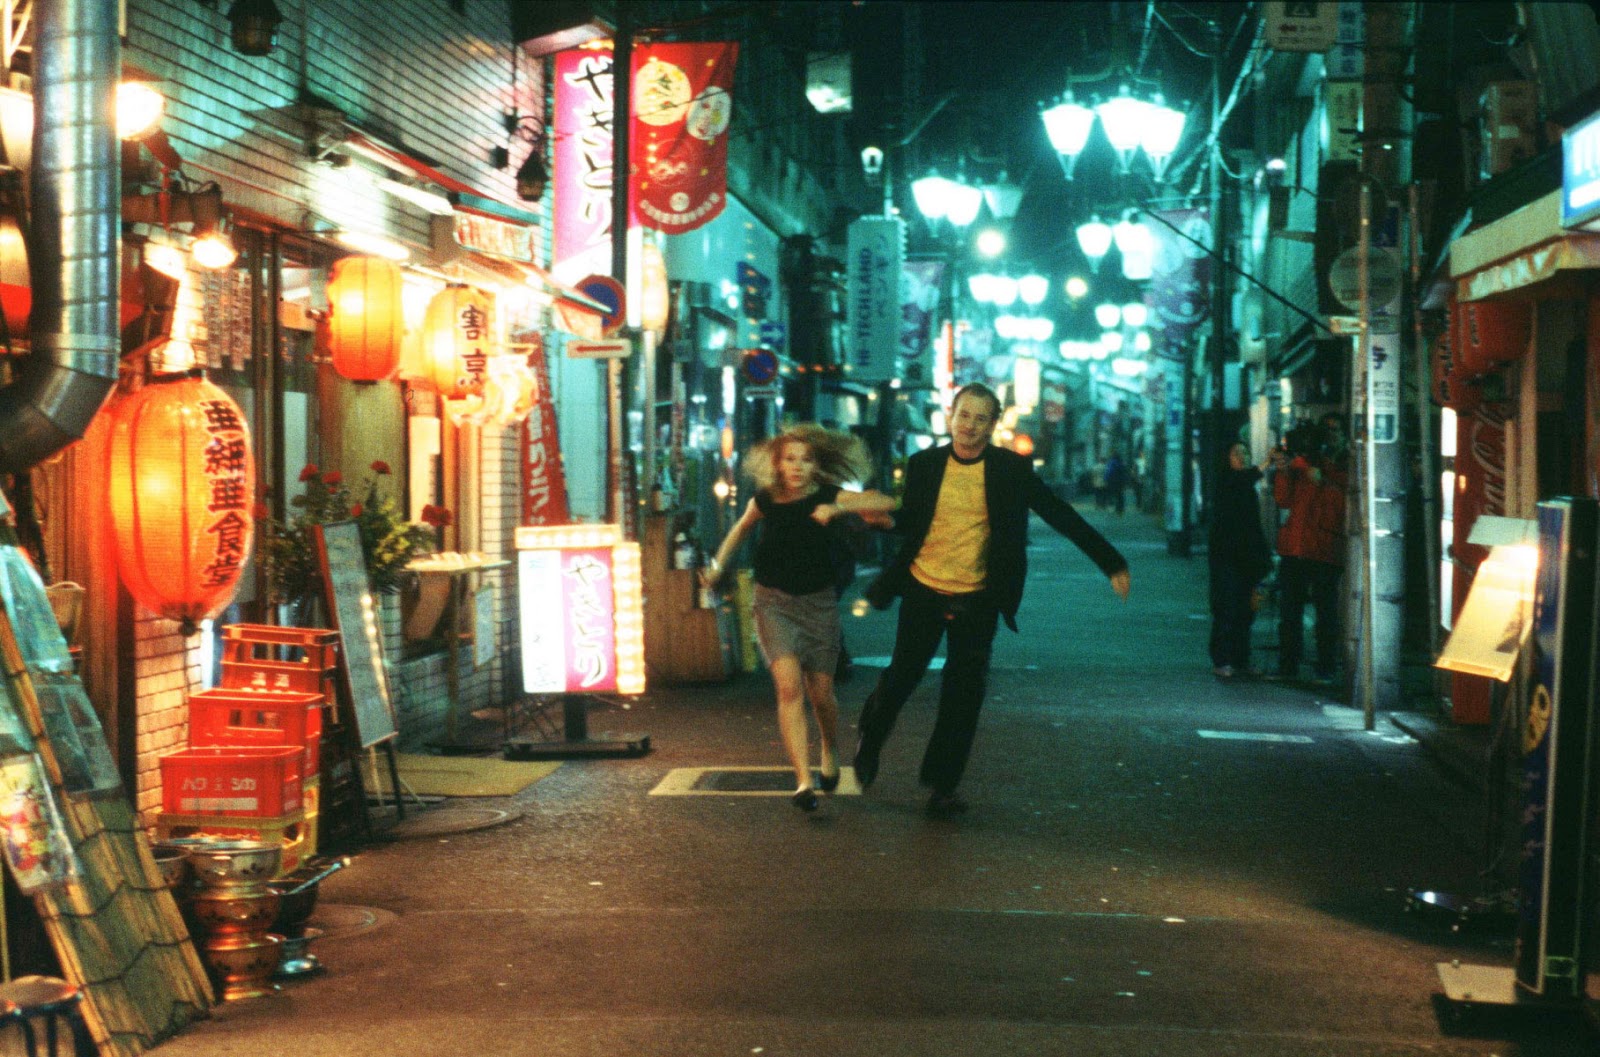 Travel Films Week: Othering and Alienation in ‘Lost in Translation’